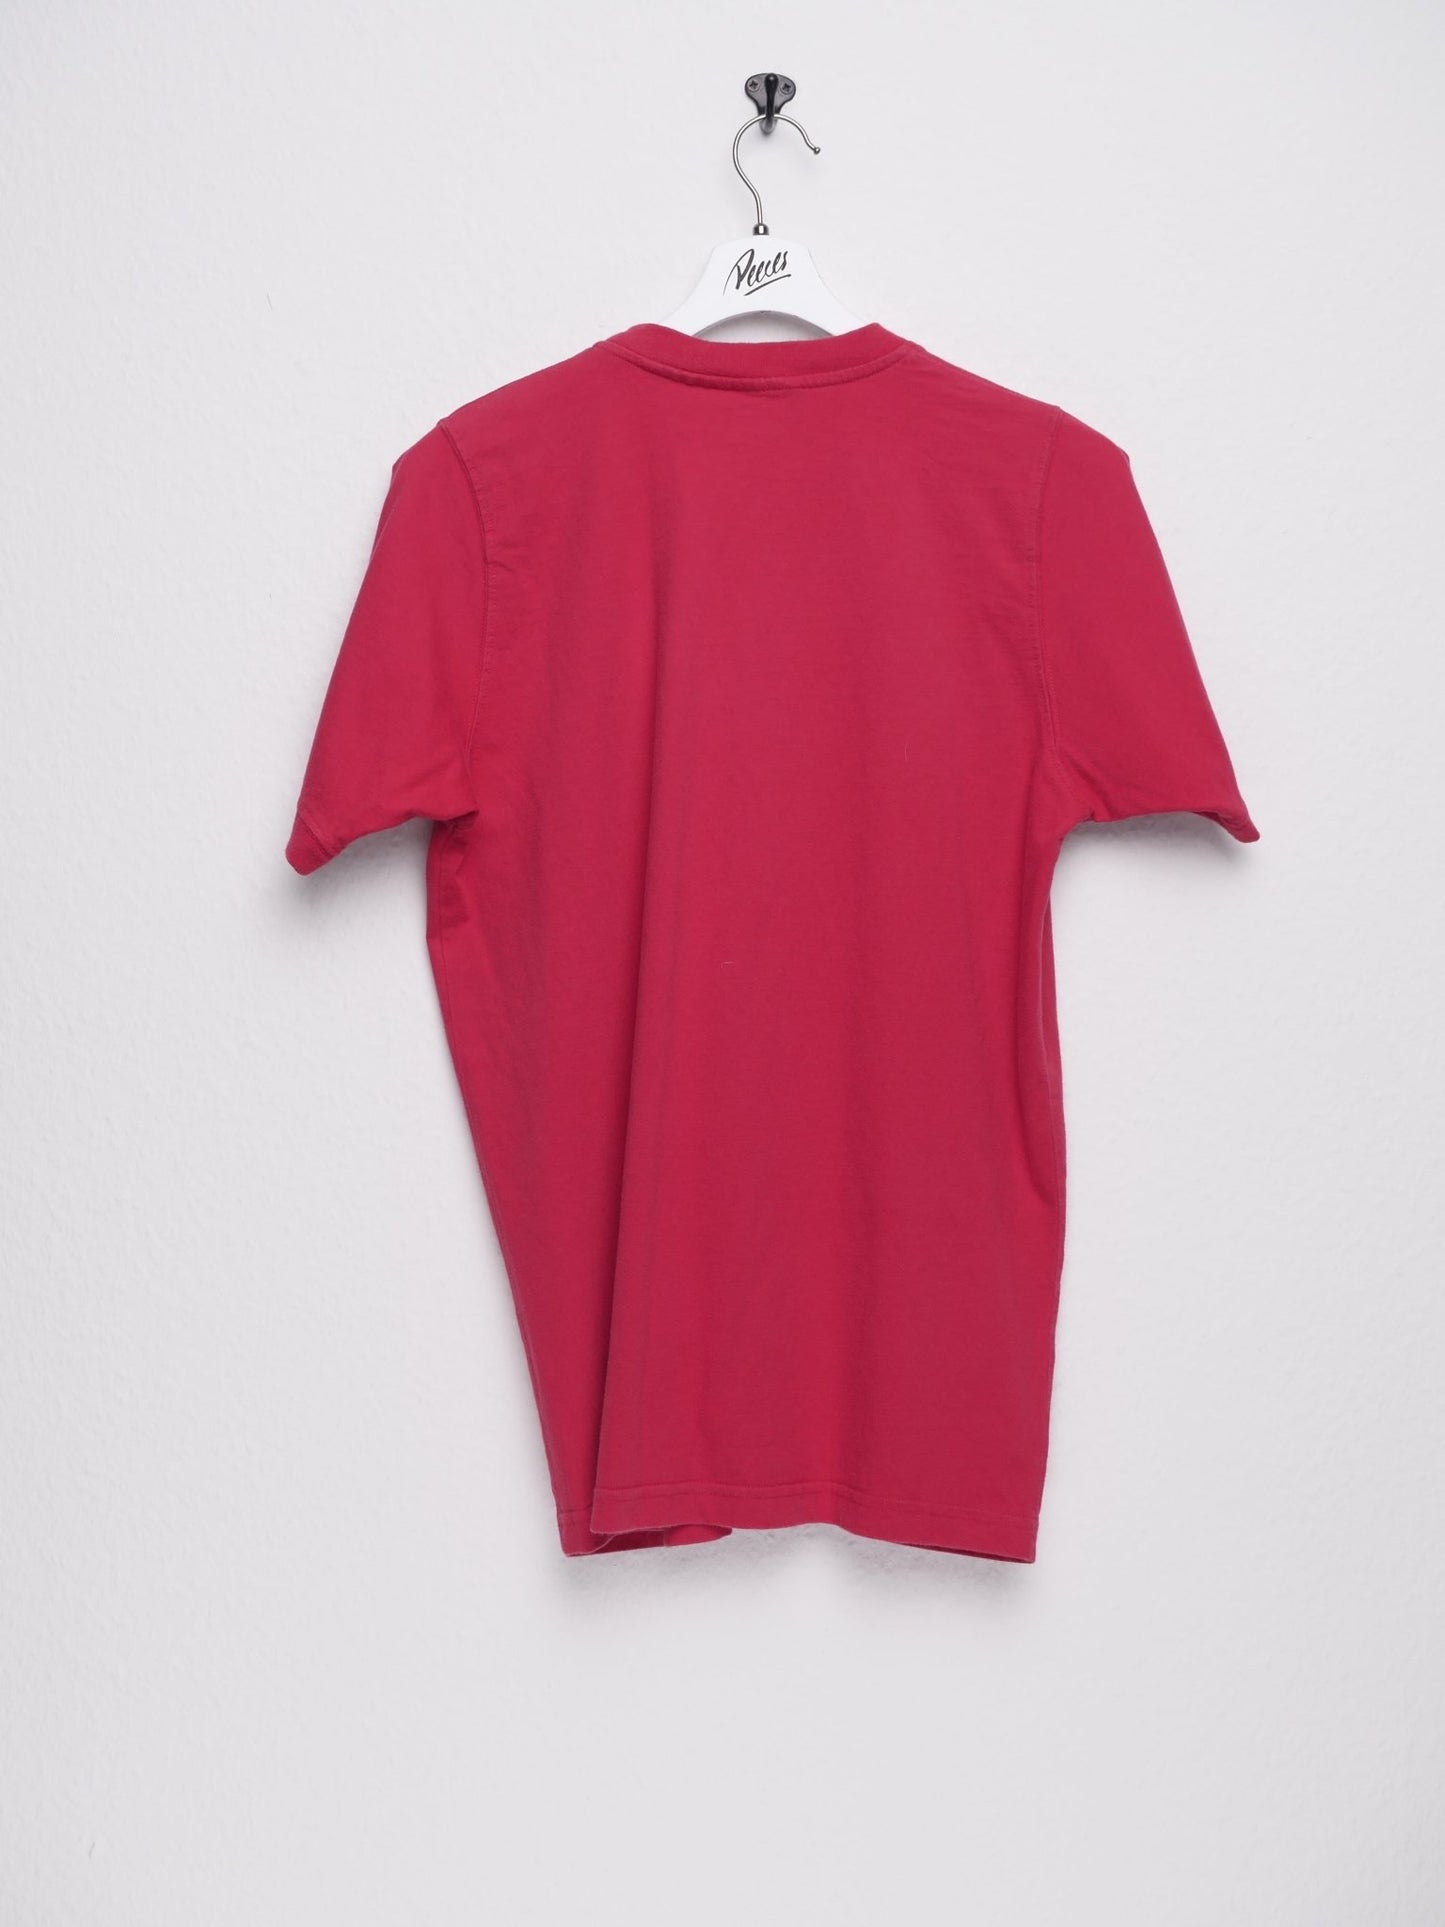 adidas embroidered Logo red Shirt - Peeces